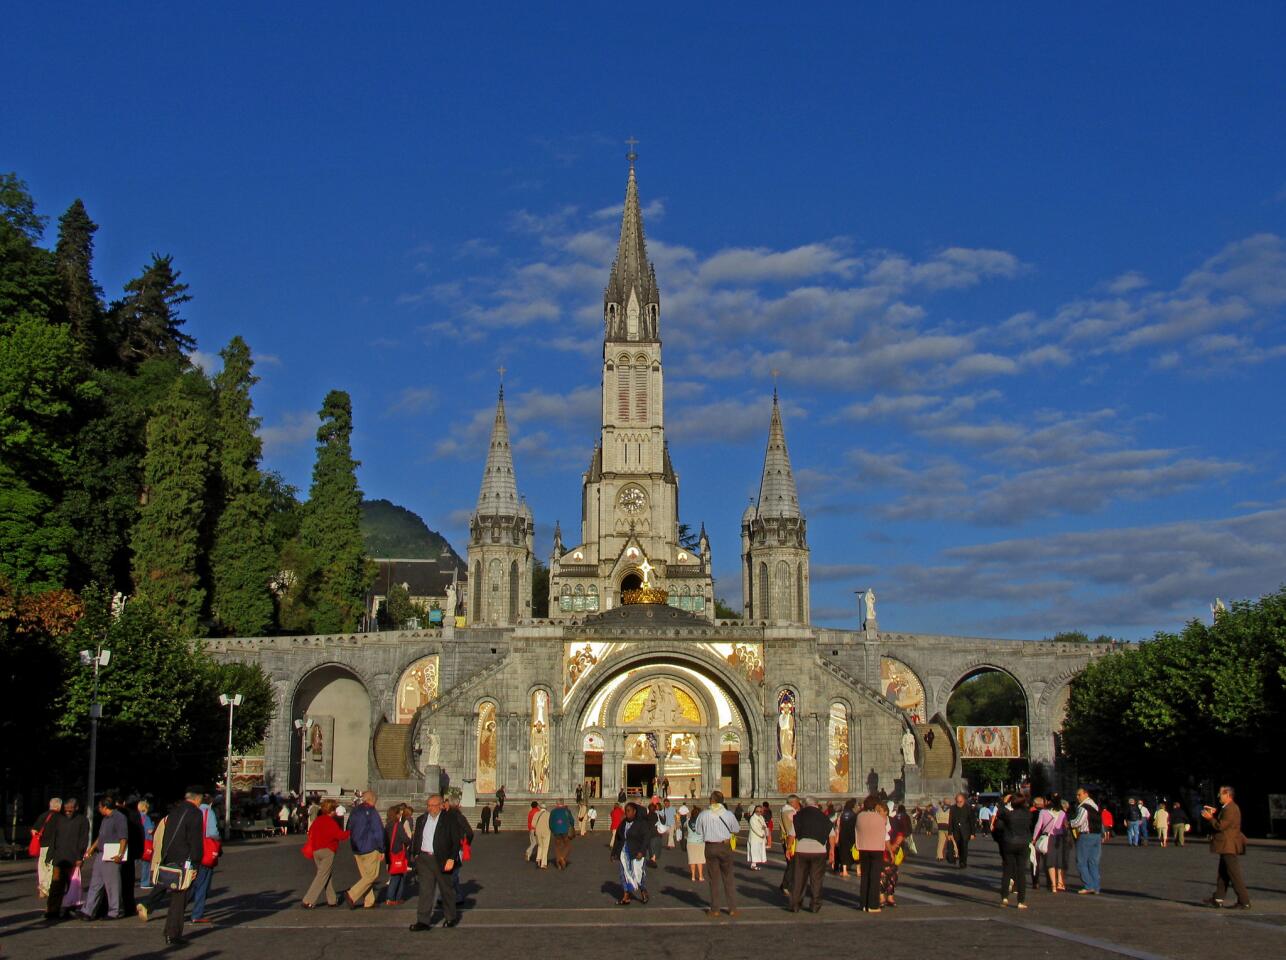 Six million people visit Lourdes every year, including 100,000 volunteers and 80,000 ill and disabled pilgrims seeking cures for their afflictions or the strength to endure them. Others come just to witness the sociological phenomenon that daily unfolds. -- Susan Spano